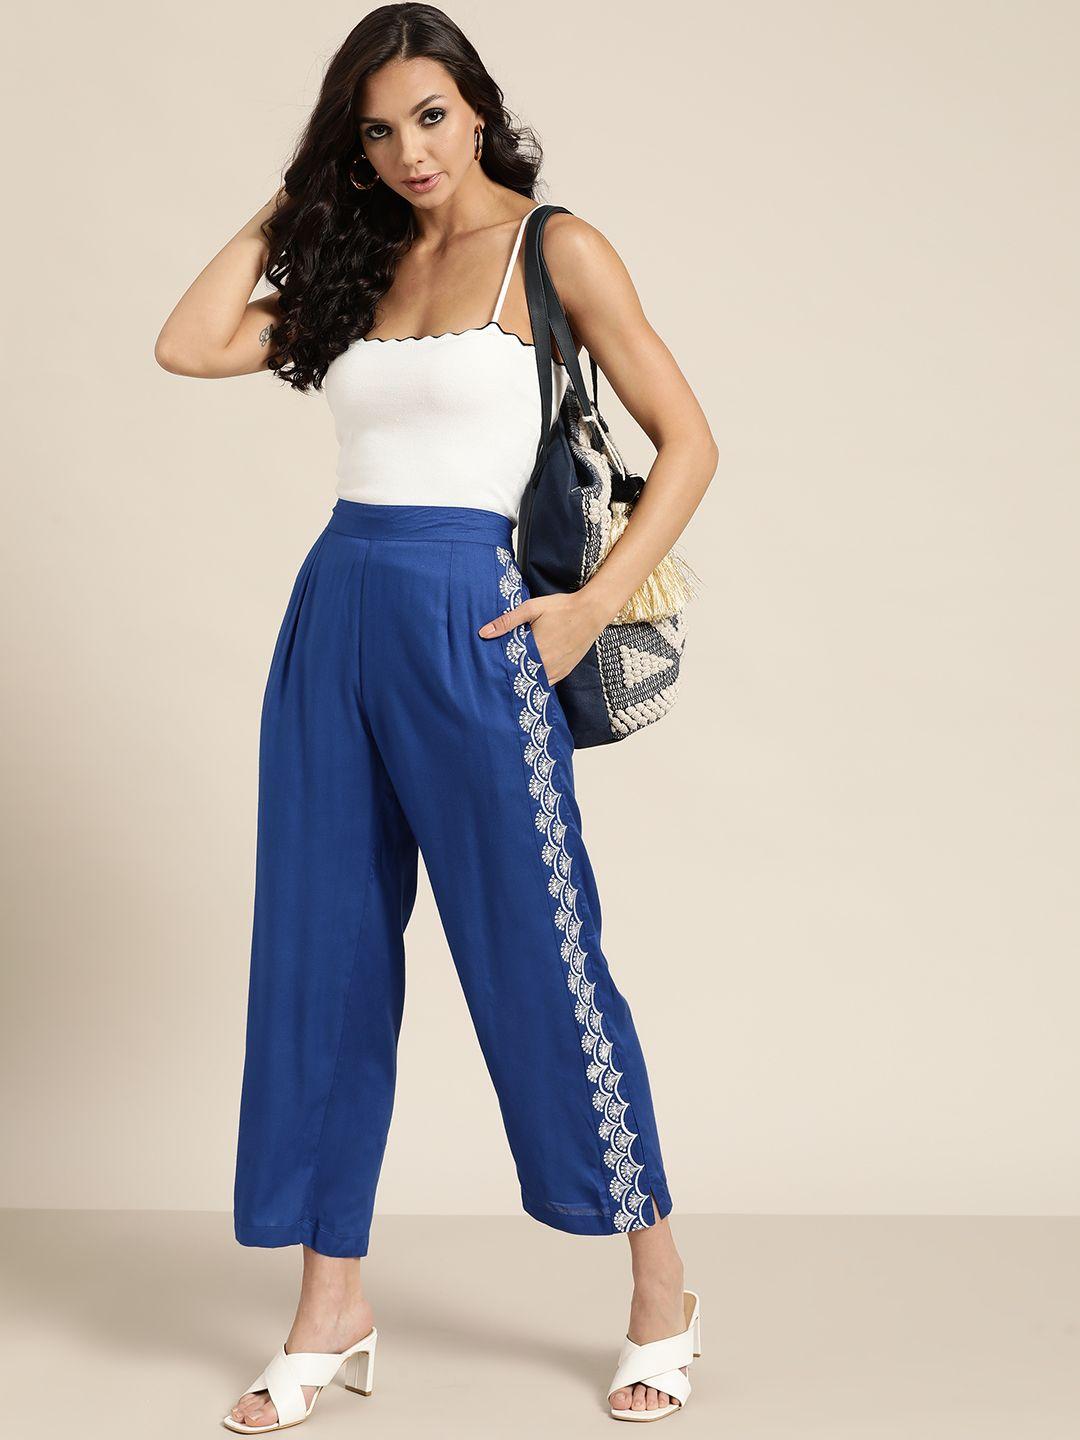 shae by sassafras women blue solid pleated trousers with embroidered detail